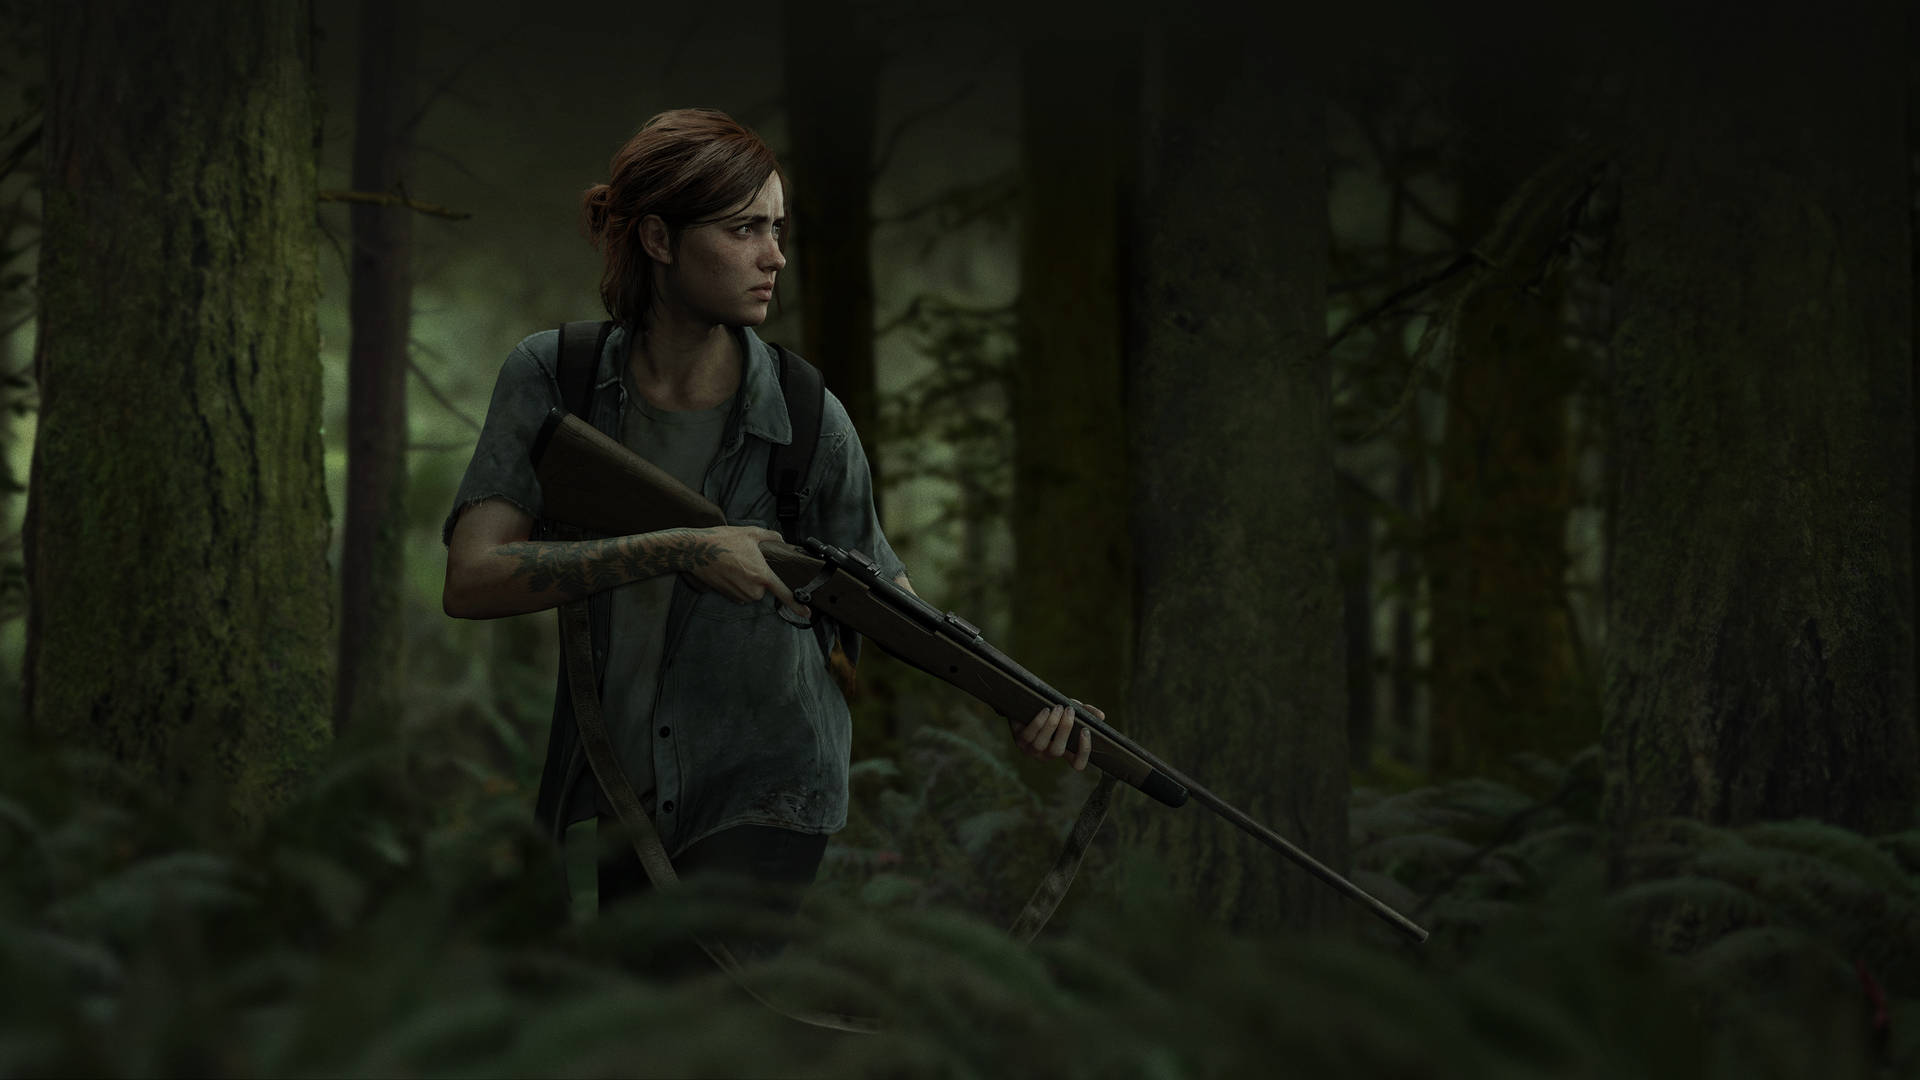 100+] The Last Of Us 4k Wallpapers